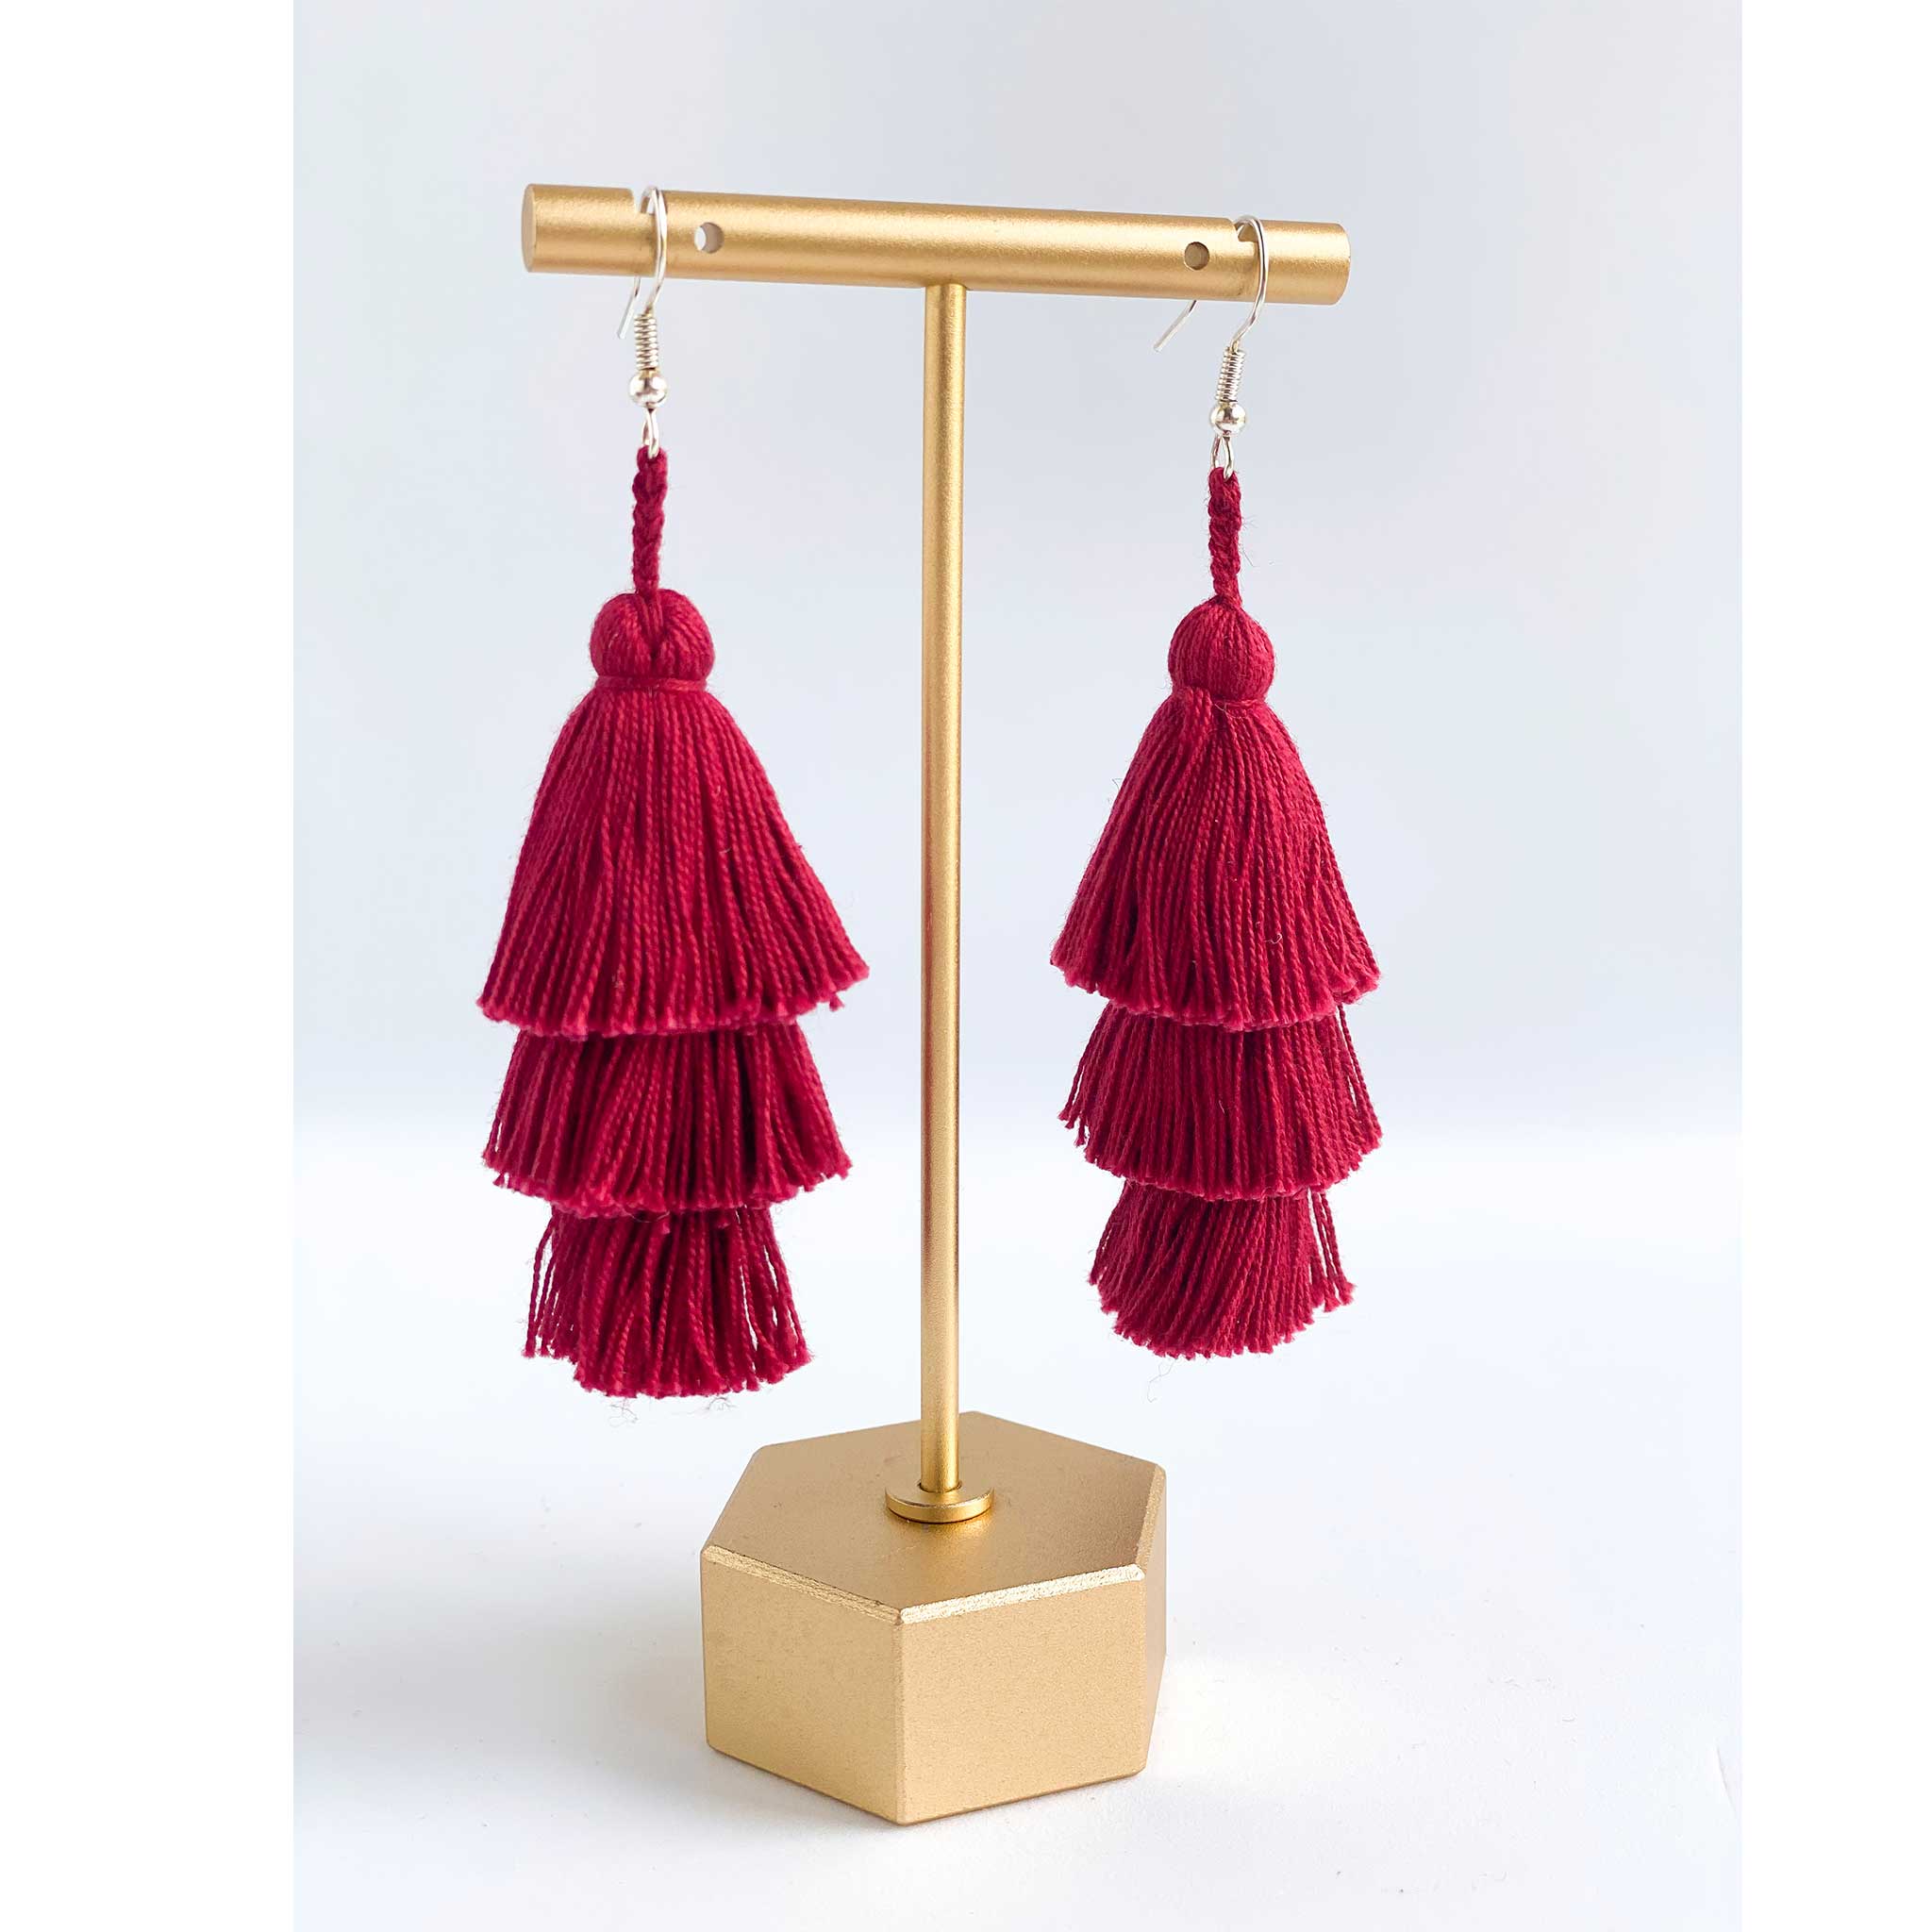 3-tiered tassel earrings in burgundy hanging from a jewelry display